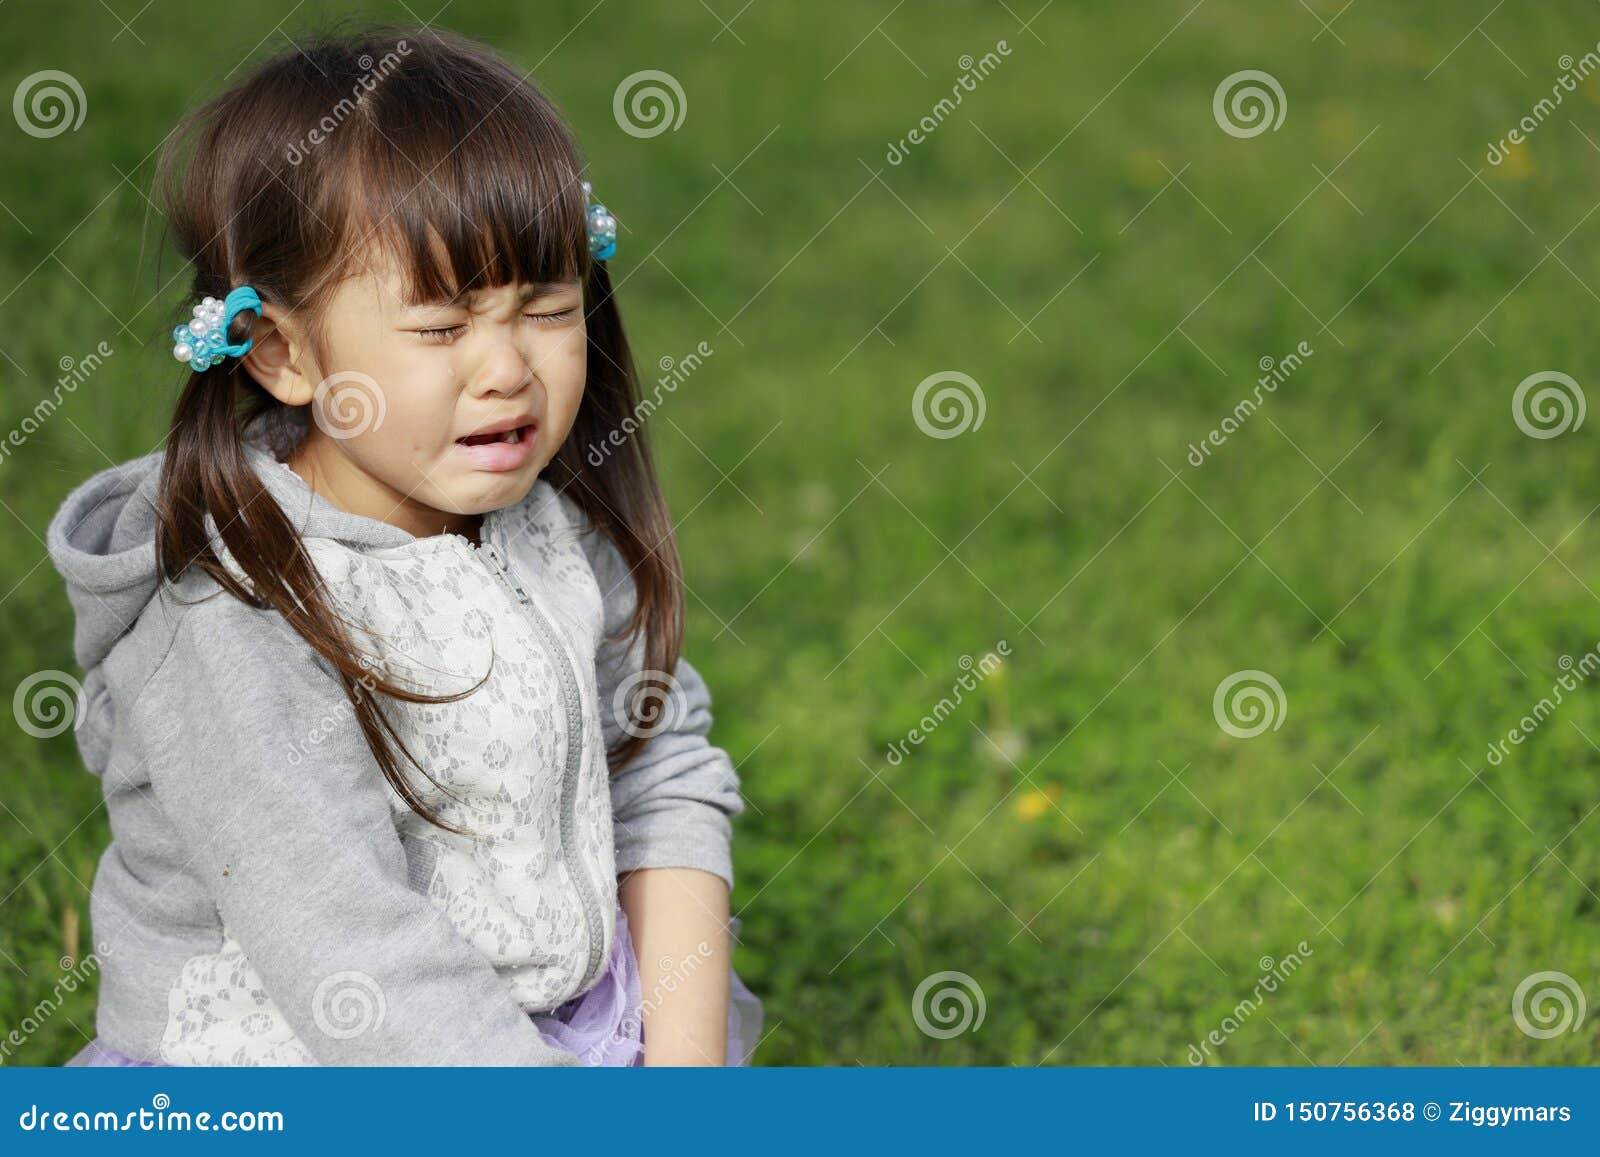 Japanese Girl Crying On The Grass Stock Photo Image Of Japanese